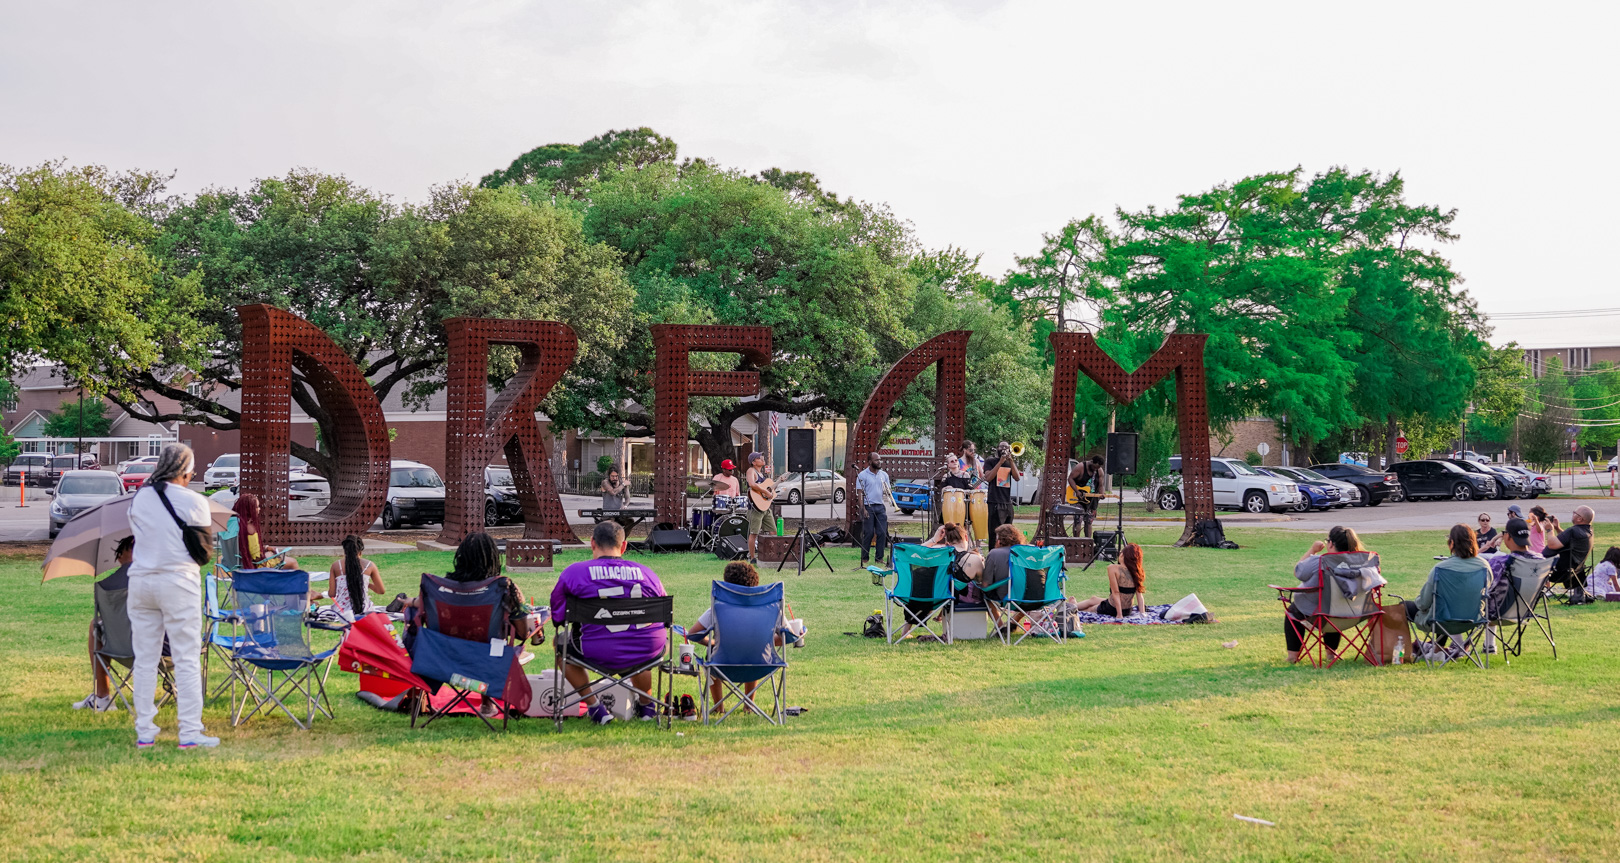 An art installation 12 ft tall with the word DREAM in a grassy park. A band plays in front of it